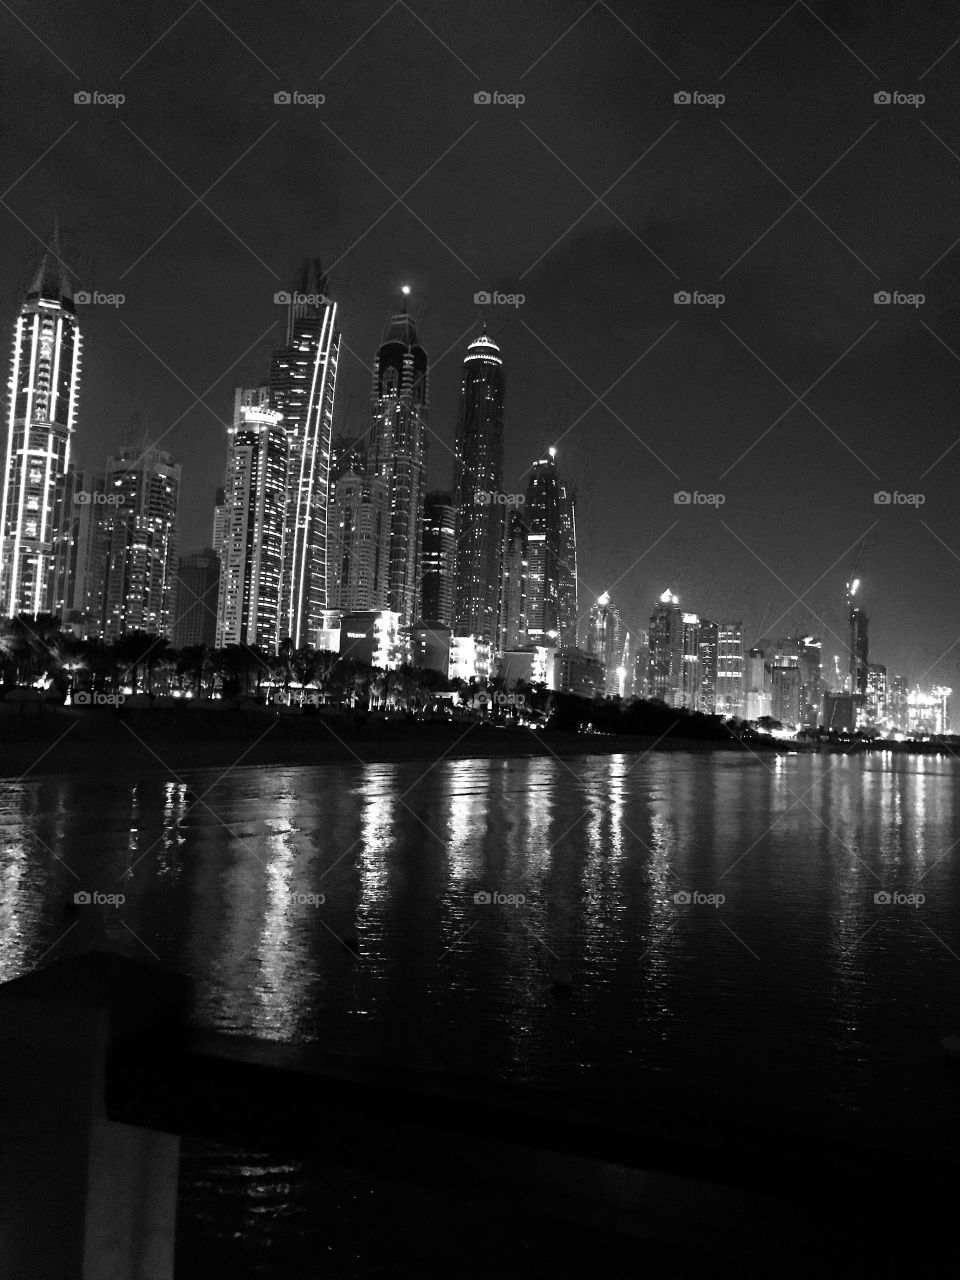 A photo of Dubai skyscrapers from the palm 